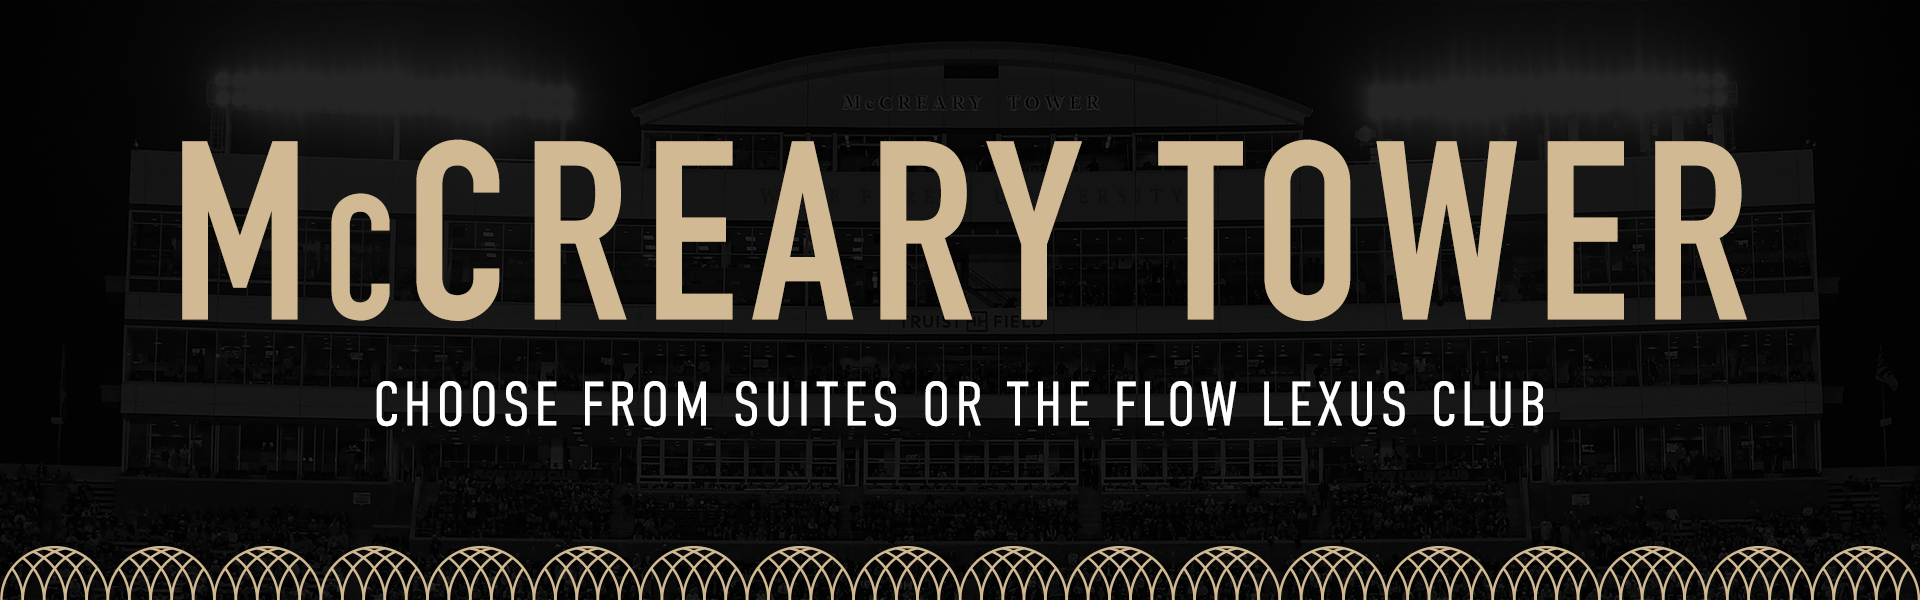 McCreary Tower | Choose from Suites or the Flow Lexus Club